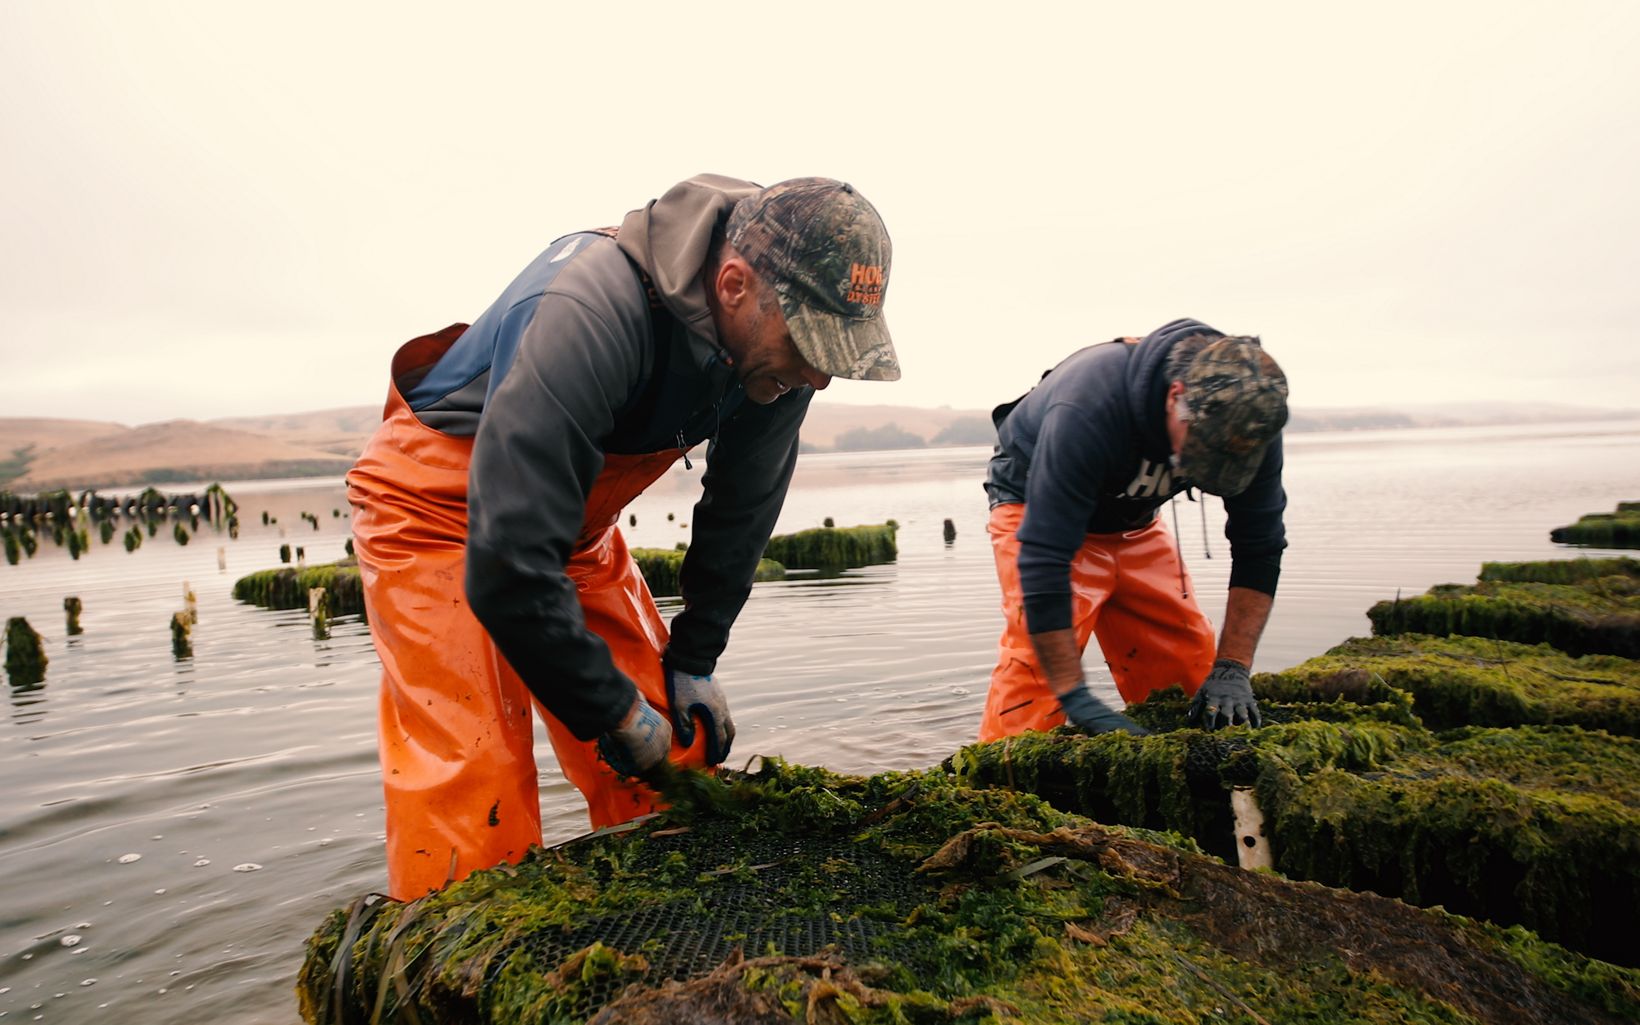 Workers at Hog Island Oyster Farm in Marshall, CA on Tomales Bay.